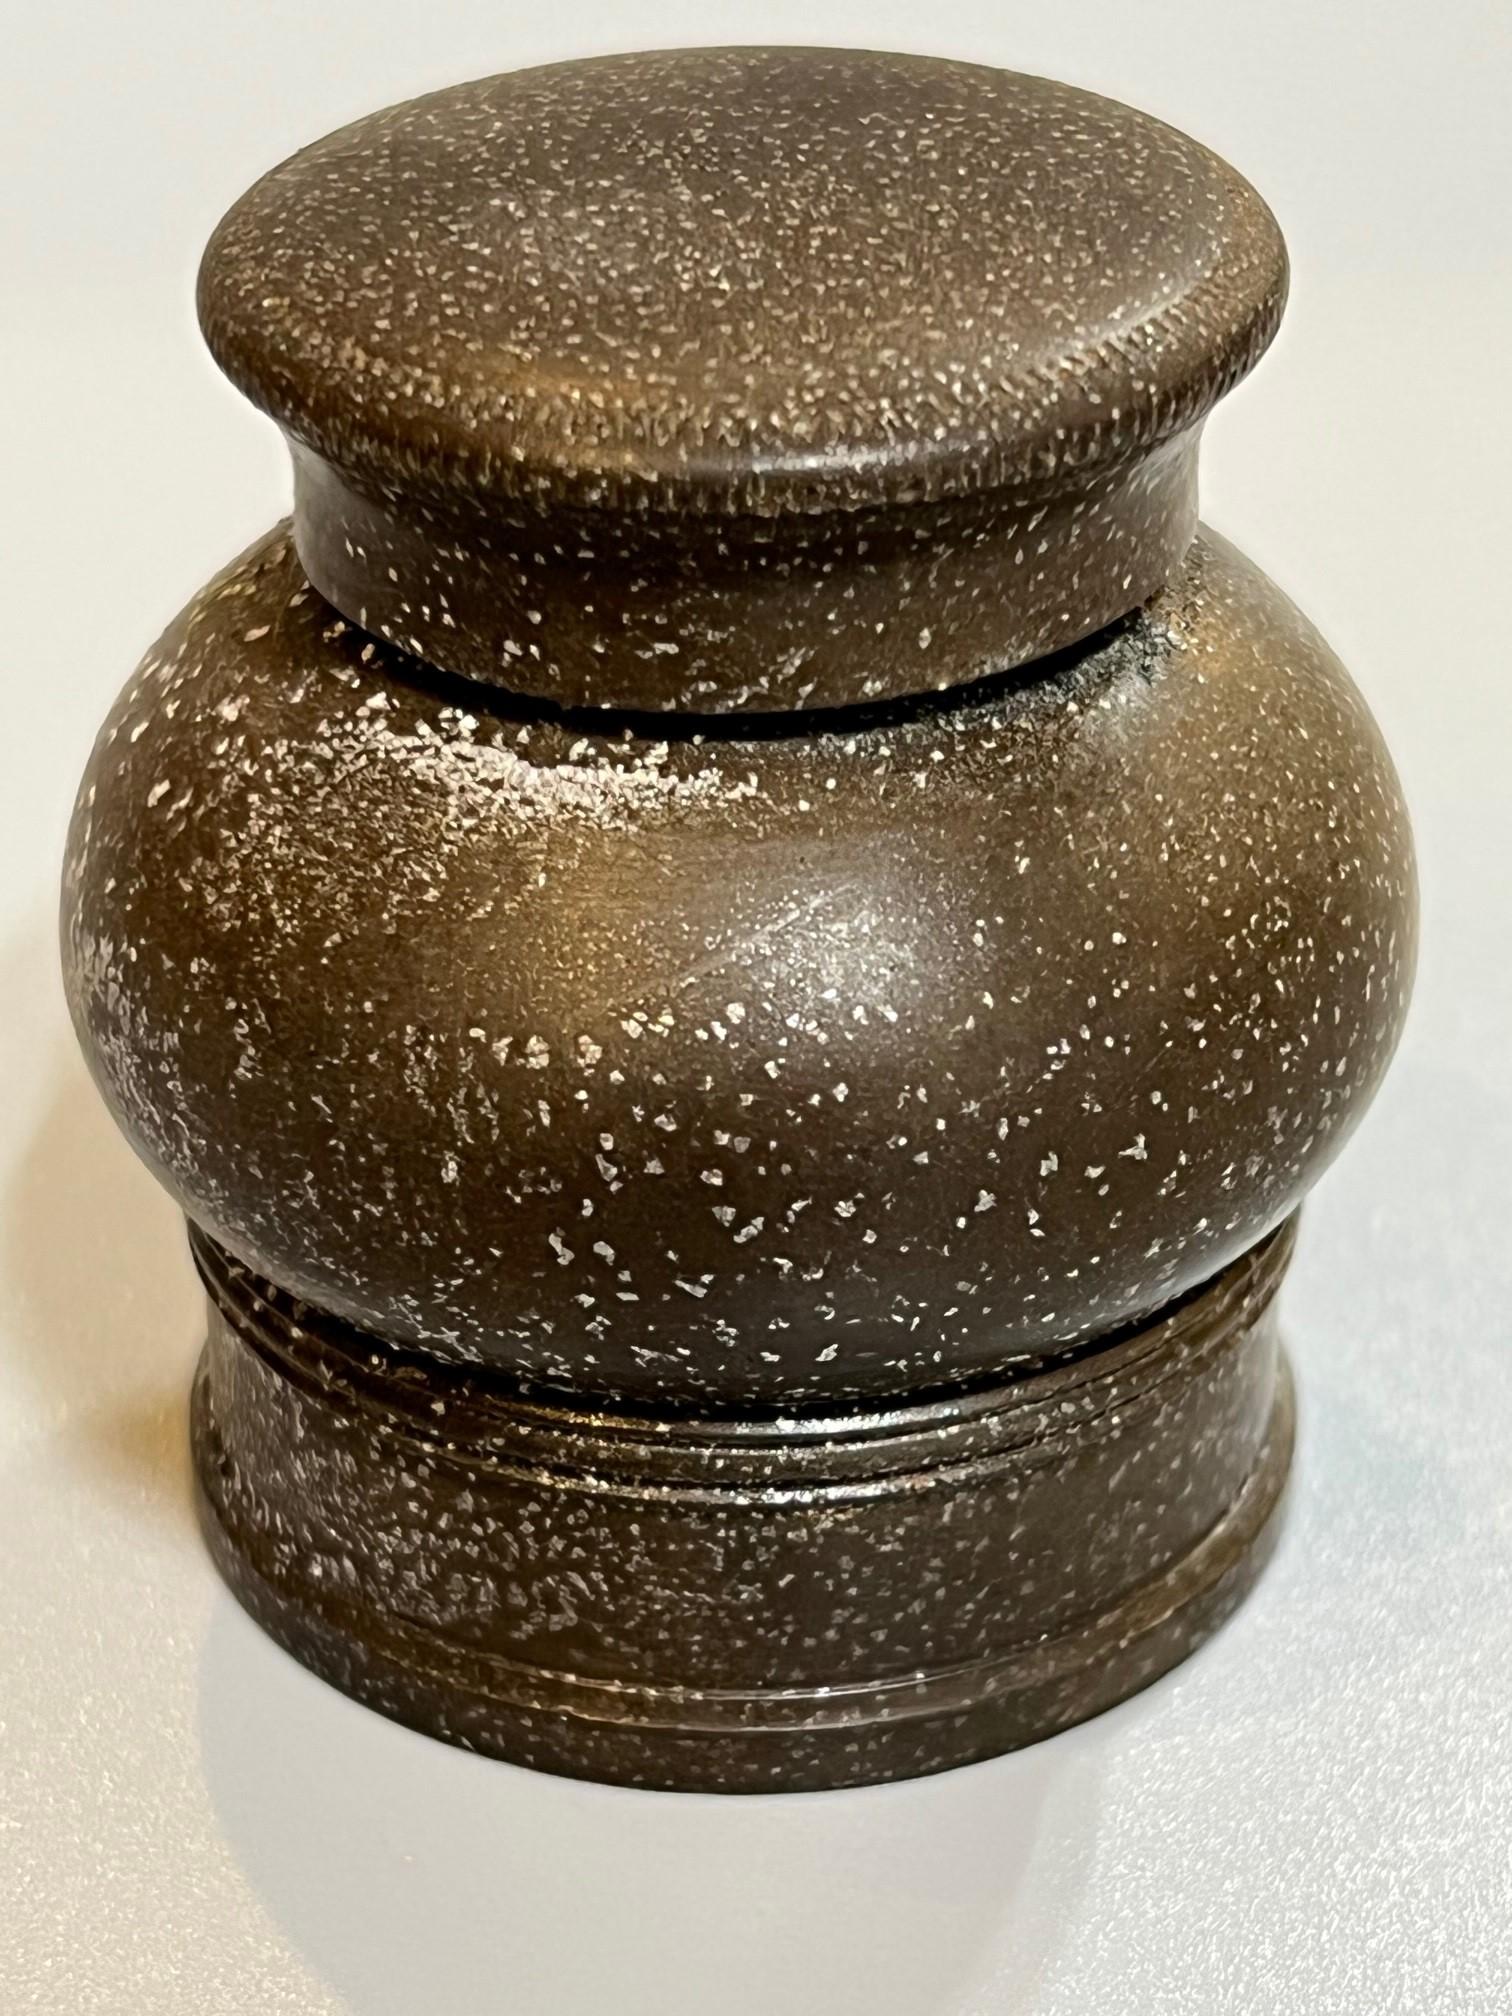 American Civil War era gutta-percha inkwell with a screw off top. In the mid 19th century, gutta-percha
(hard rubber) became very popular. For Civil War soldiers, this was a great improvement over the usual glass inkwells, they closed tightly and